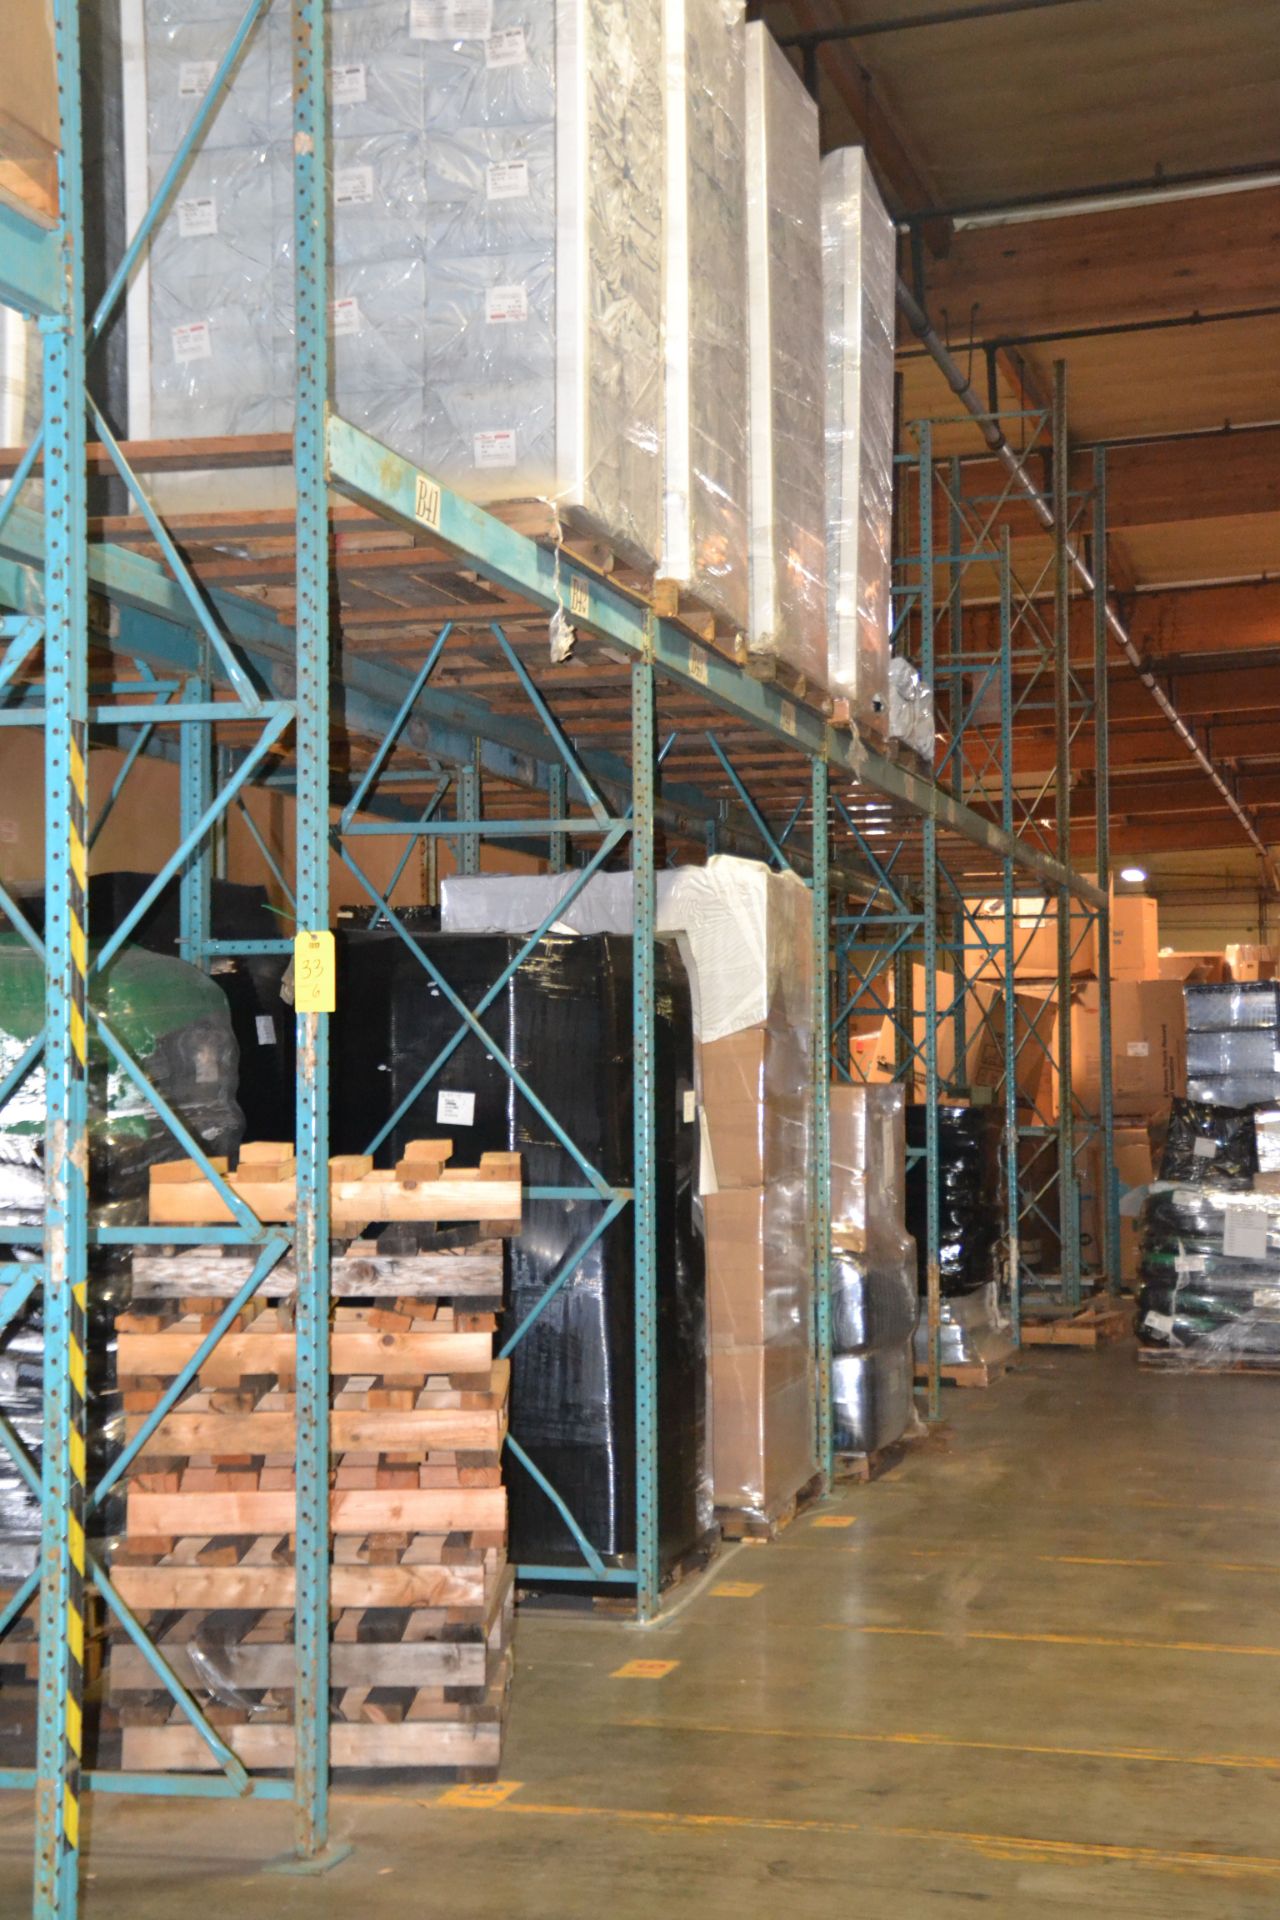 SECTIONS OF PALLET RACKING, 8'x20'x44"